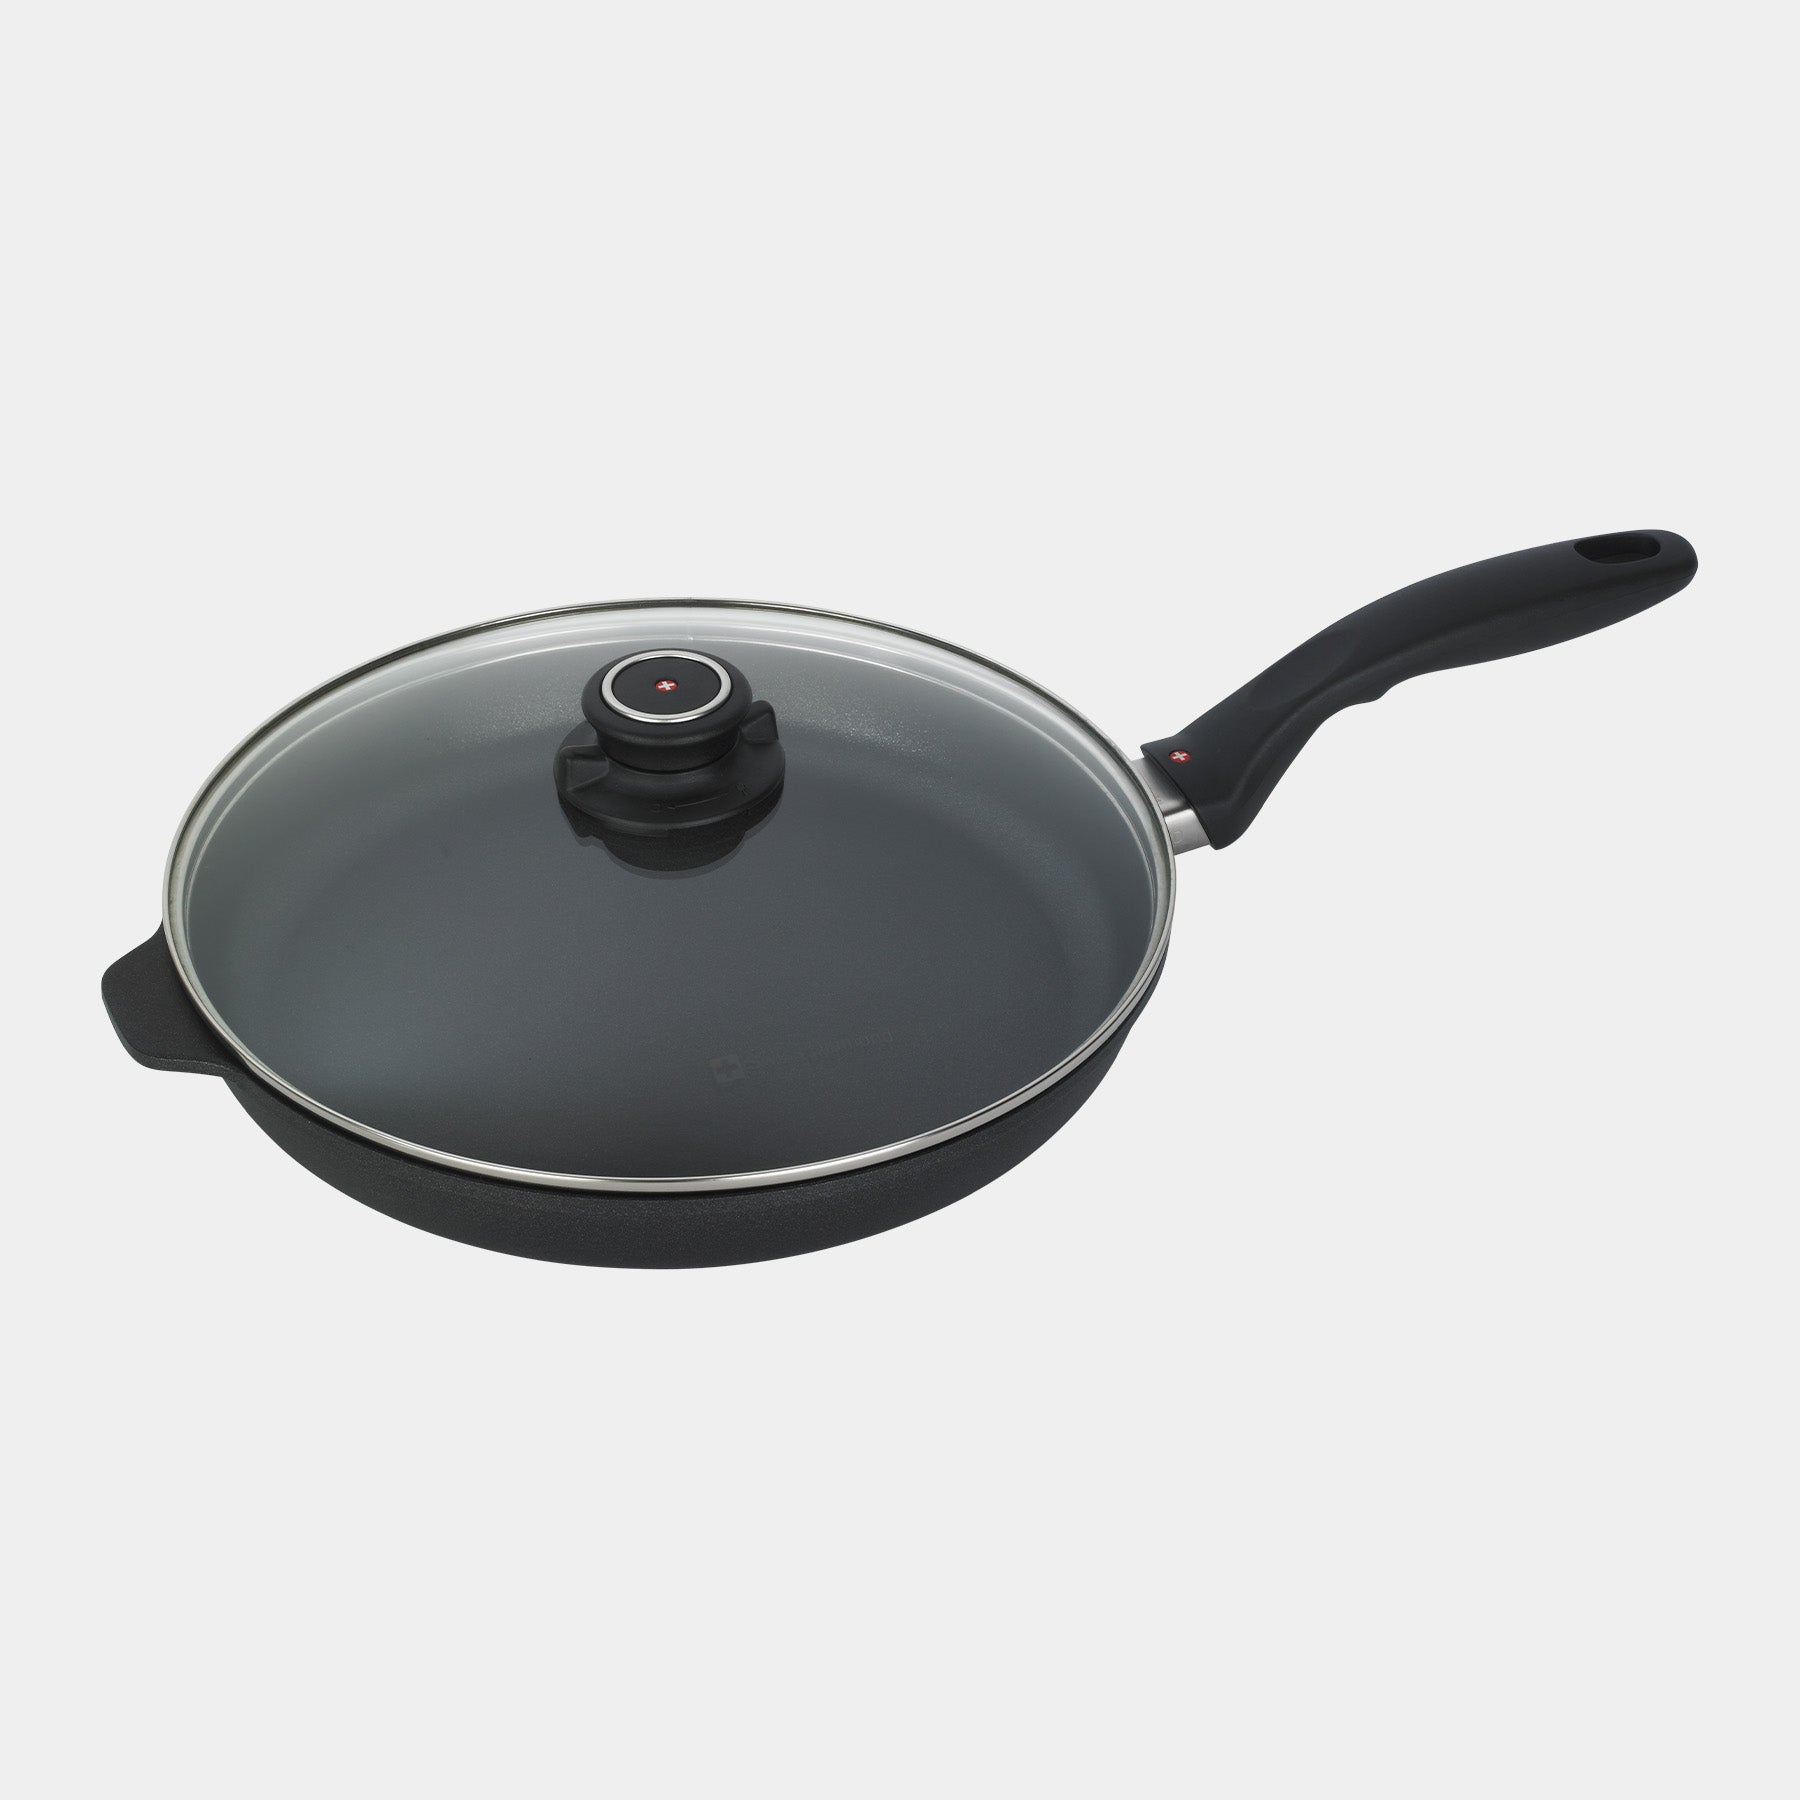 XD Nonstick 11" Fry Pan with glass lid